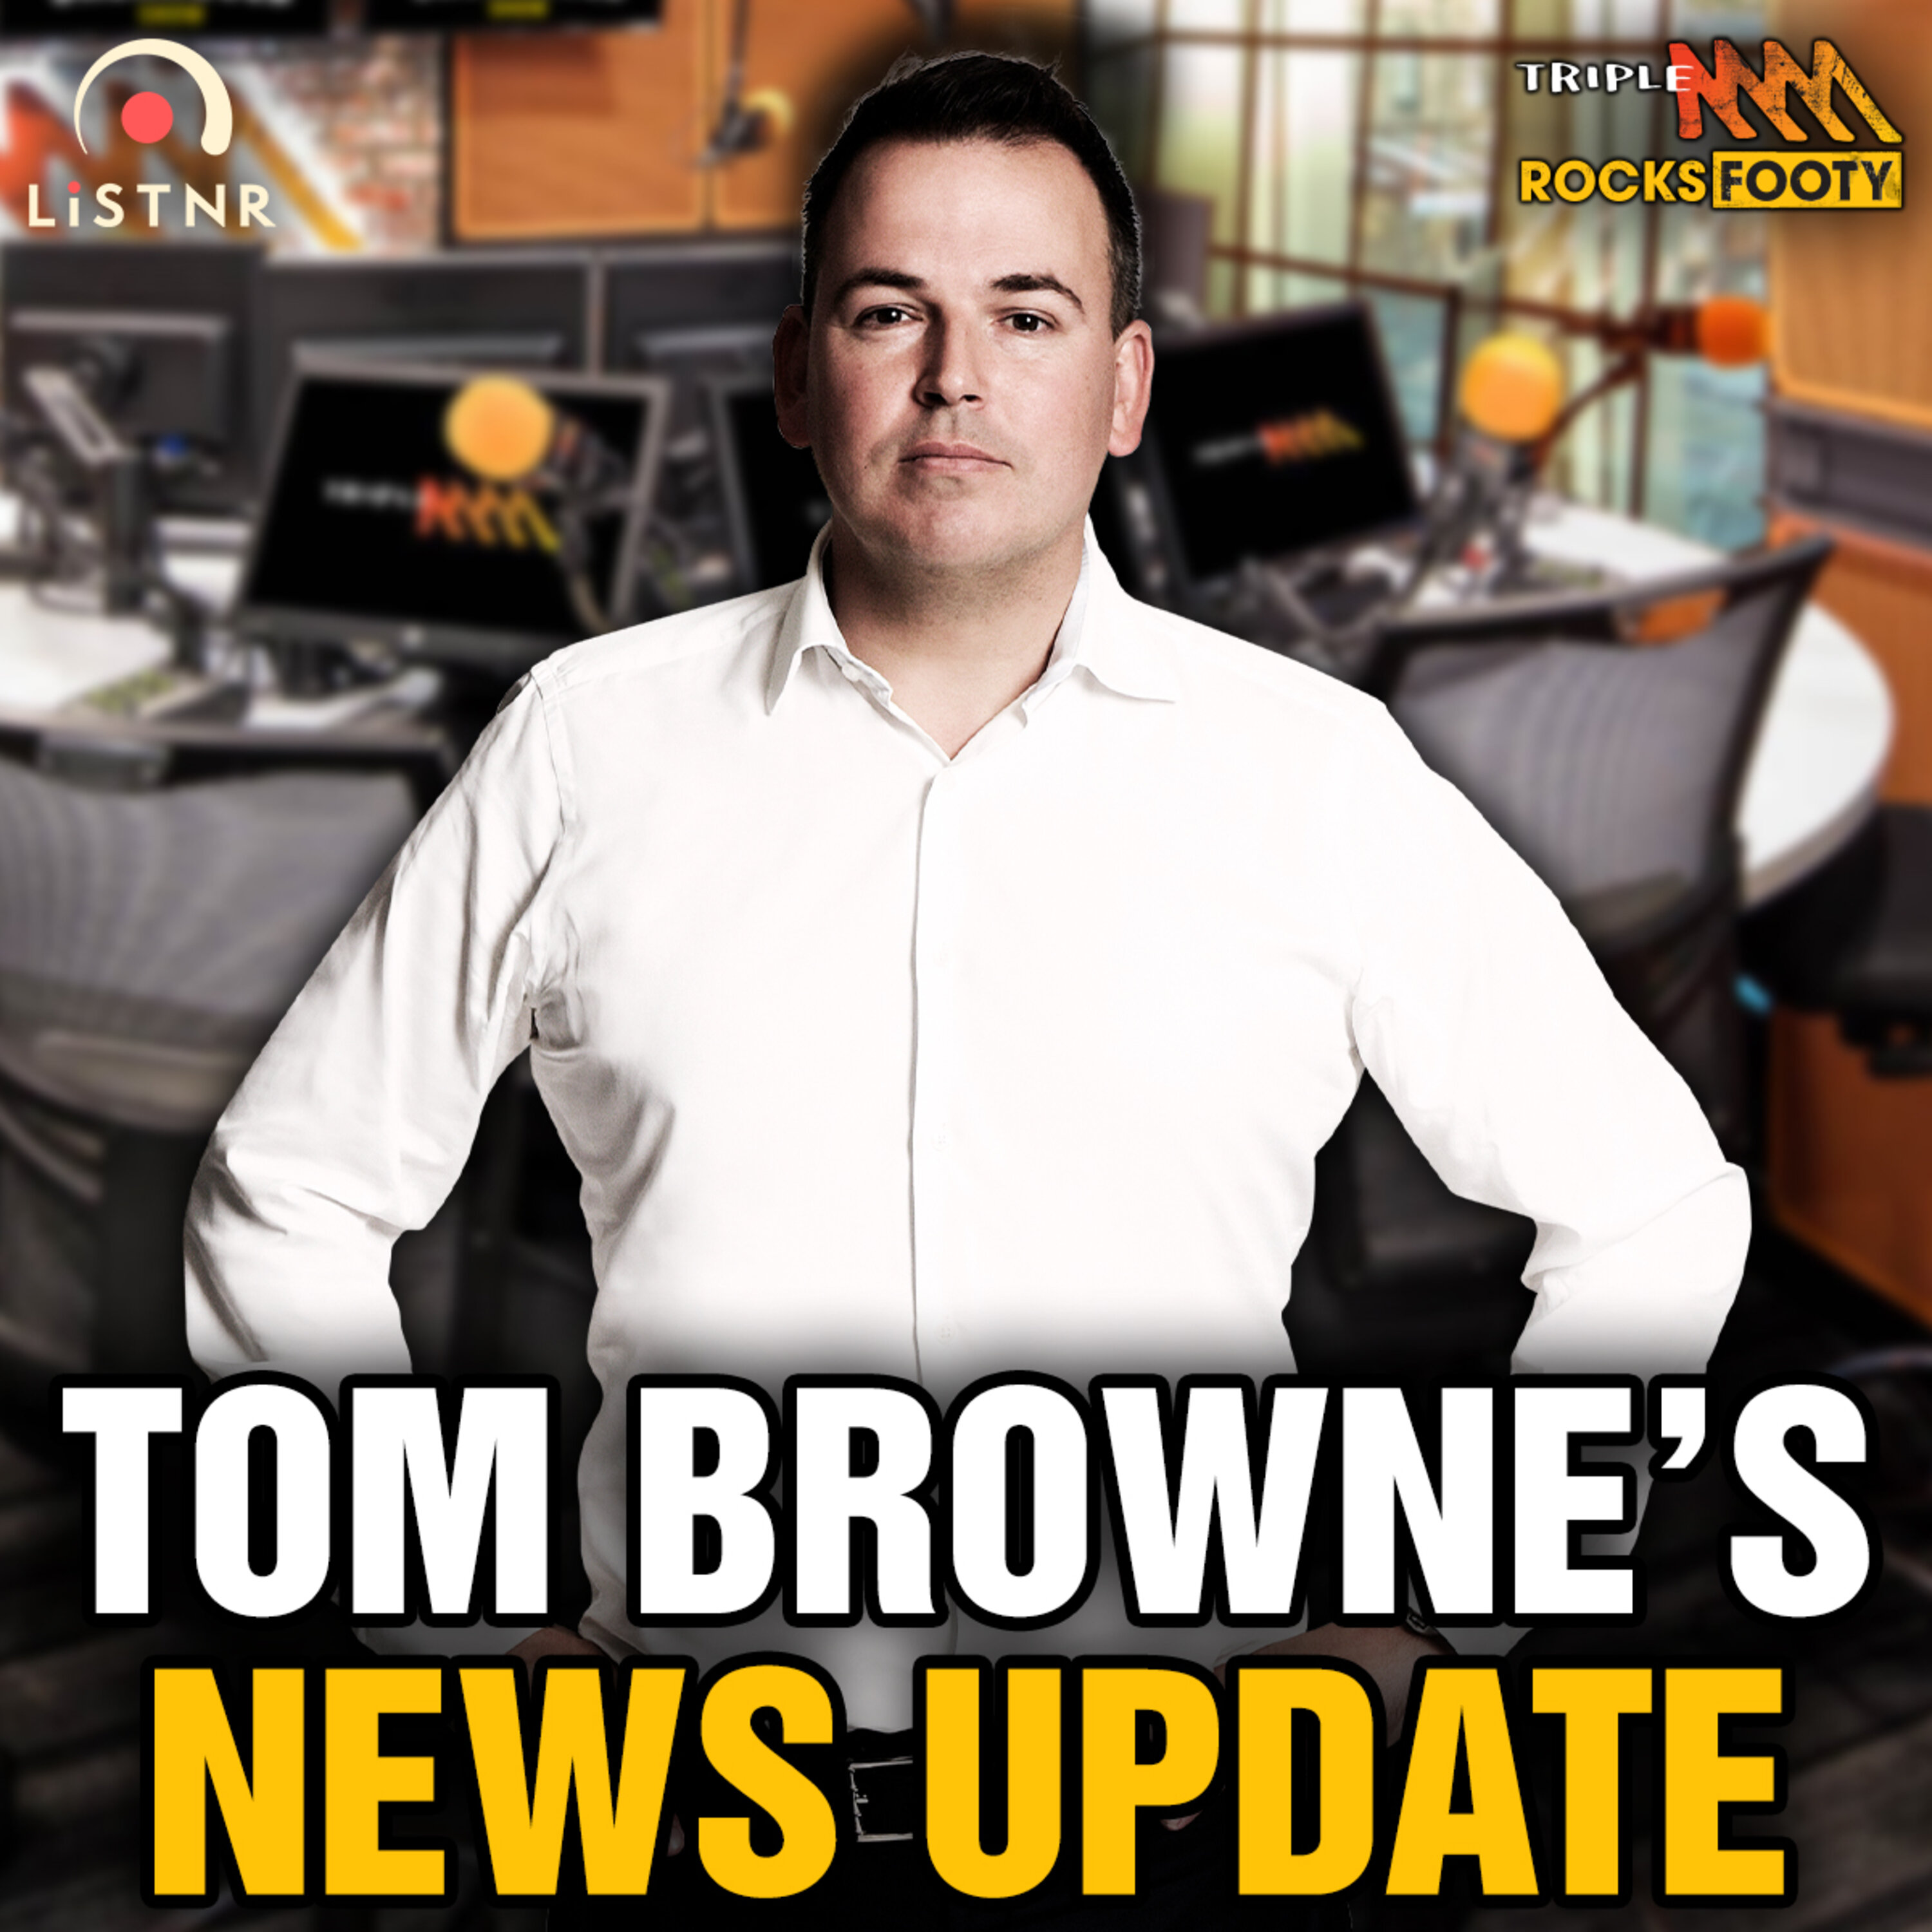 Tom Browne's News | A dramatic first game draw, why SOS didn't go into Carlton's rooms, Peter Wright's mixed day